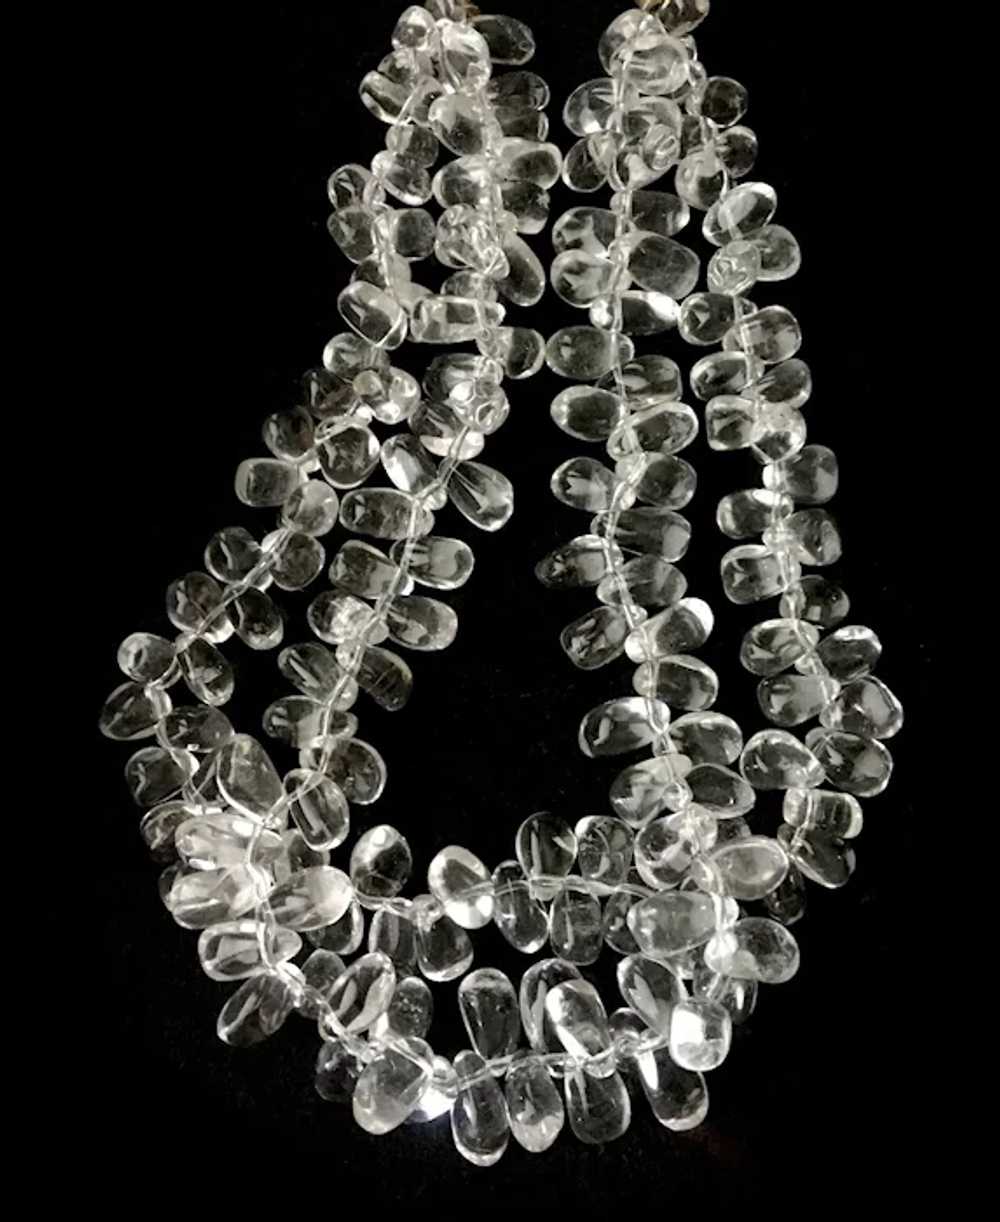 Chunky Rock Crystal Wide Collar Necklace - image 6